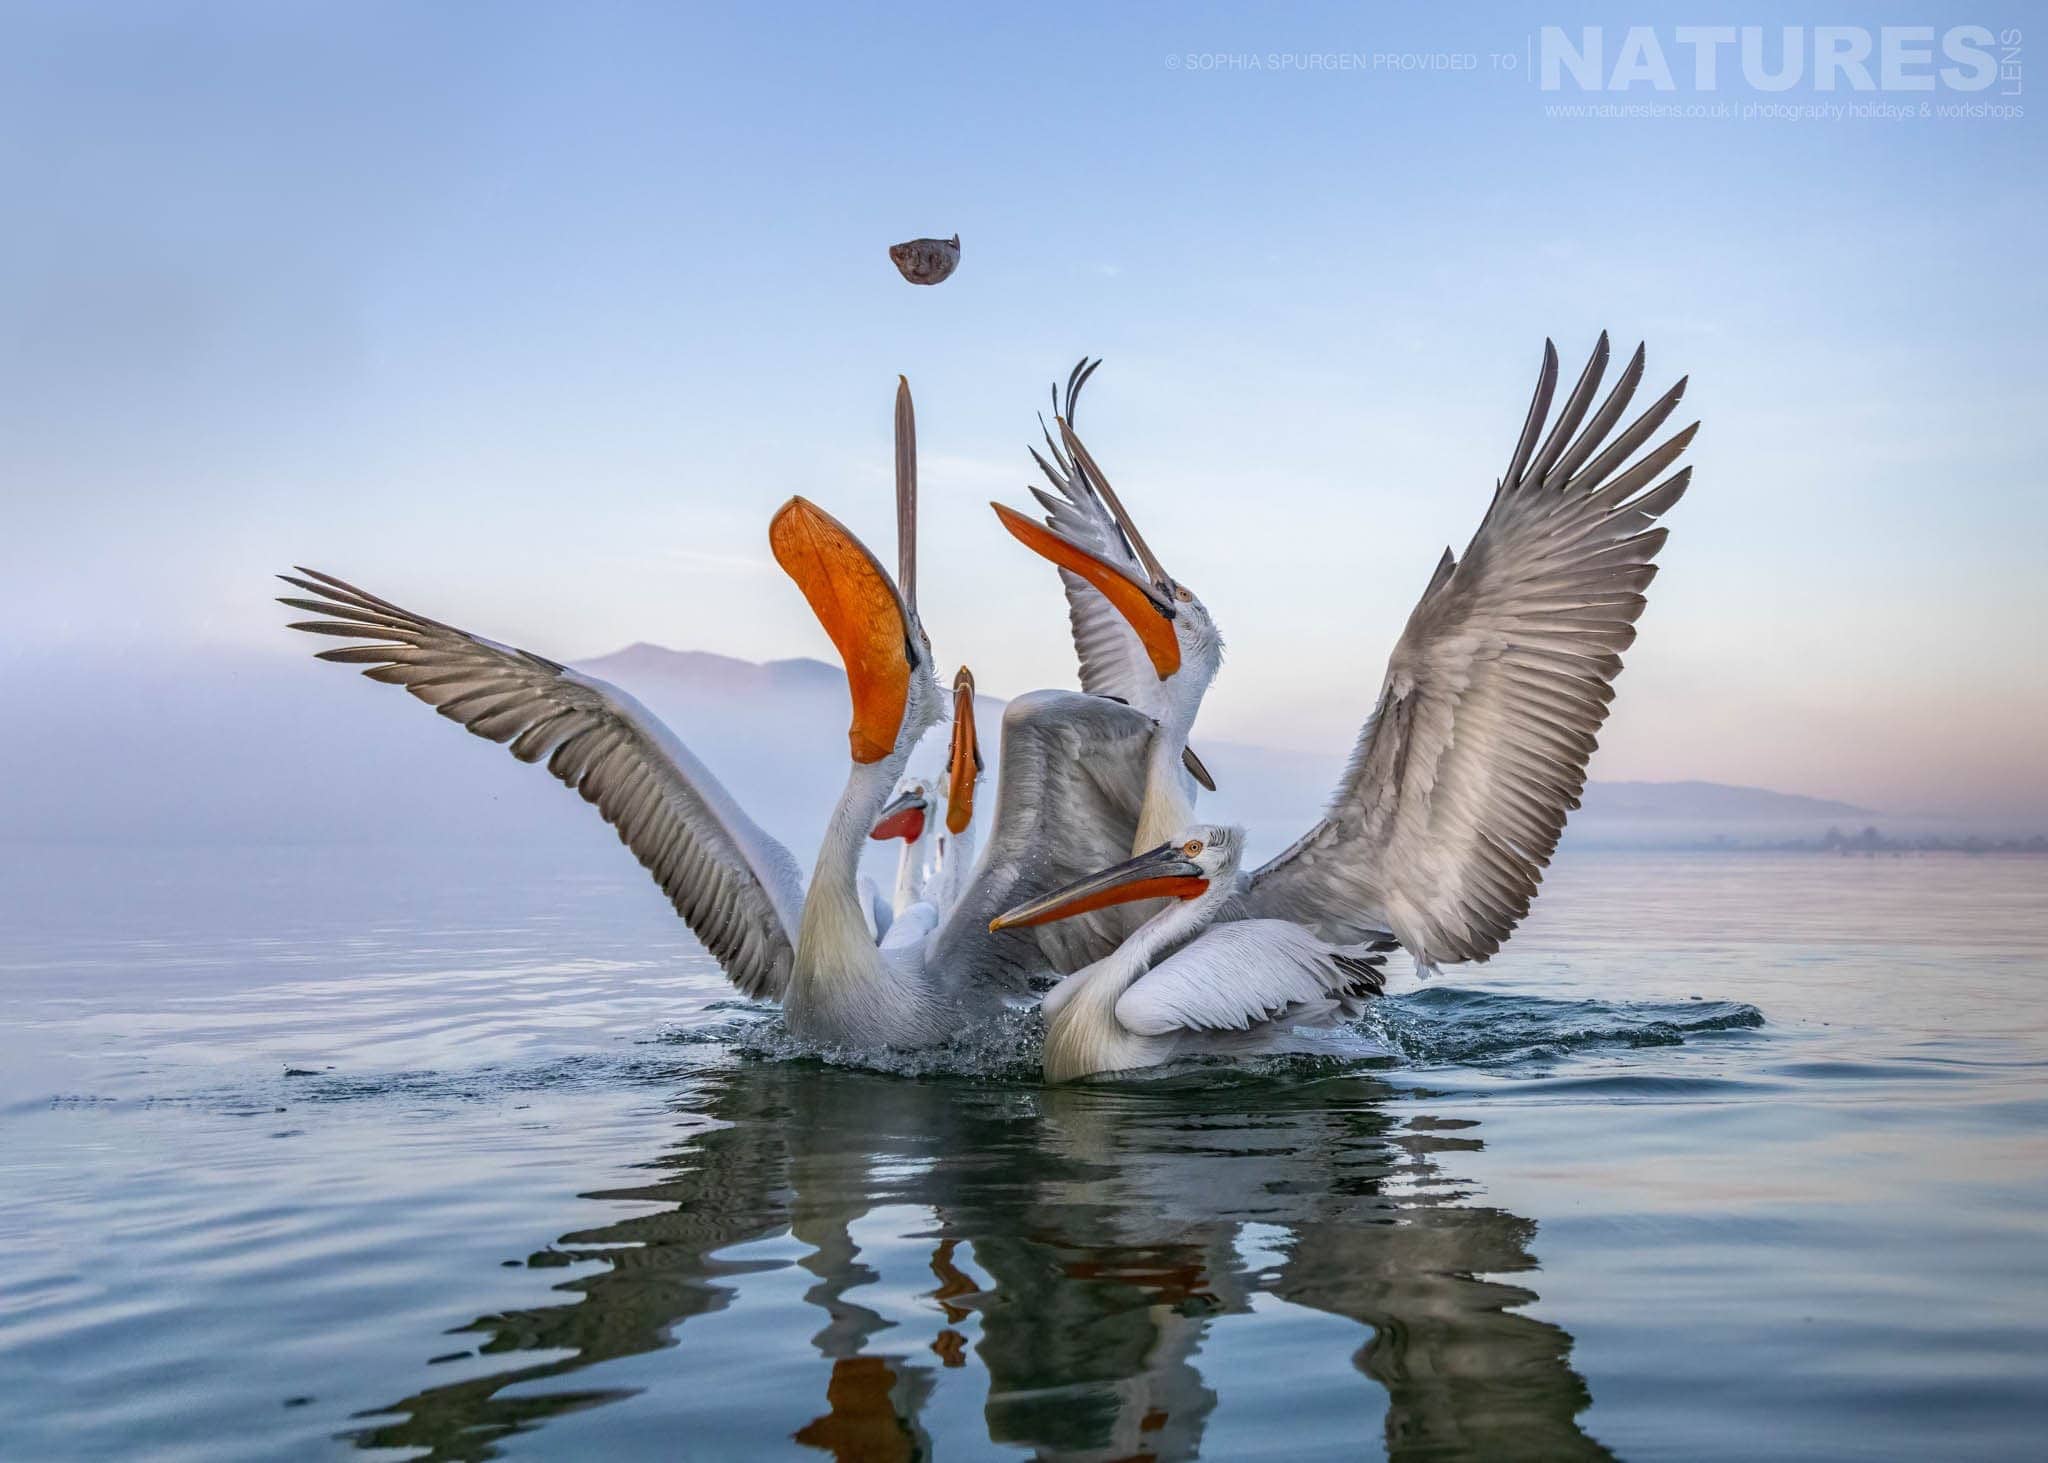 A Group Of The Dalmatian Pelicans Of Greece Reaching For A Thrown Fish On The Waters Of Lake Kerkini